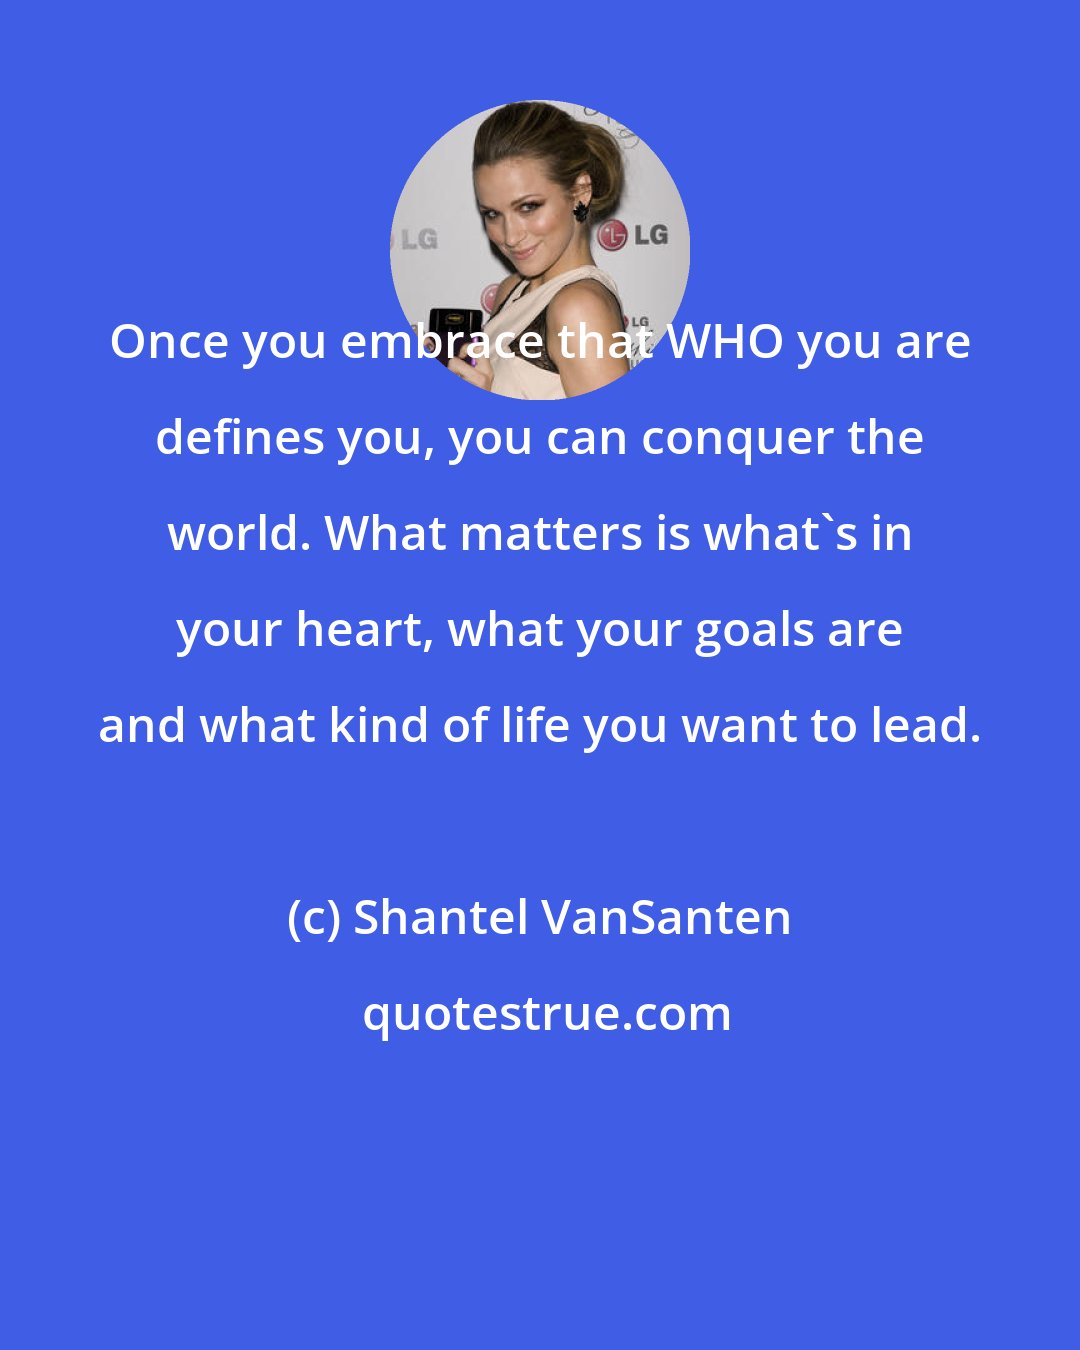 Shantel VanSanten: Once you embrace that WHO you are defines you, you can conquer the world. What matters is what's in your heart, what your goals are and what kind of life you want to lead.